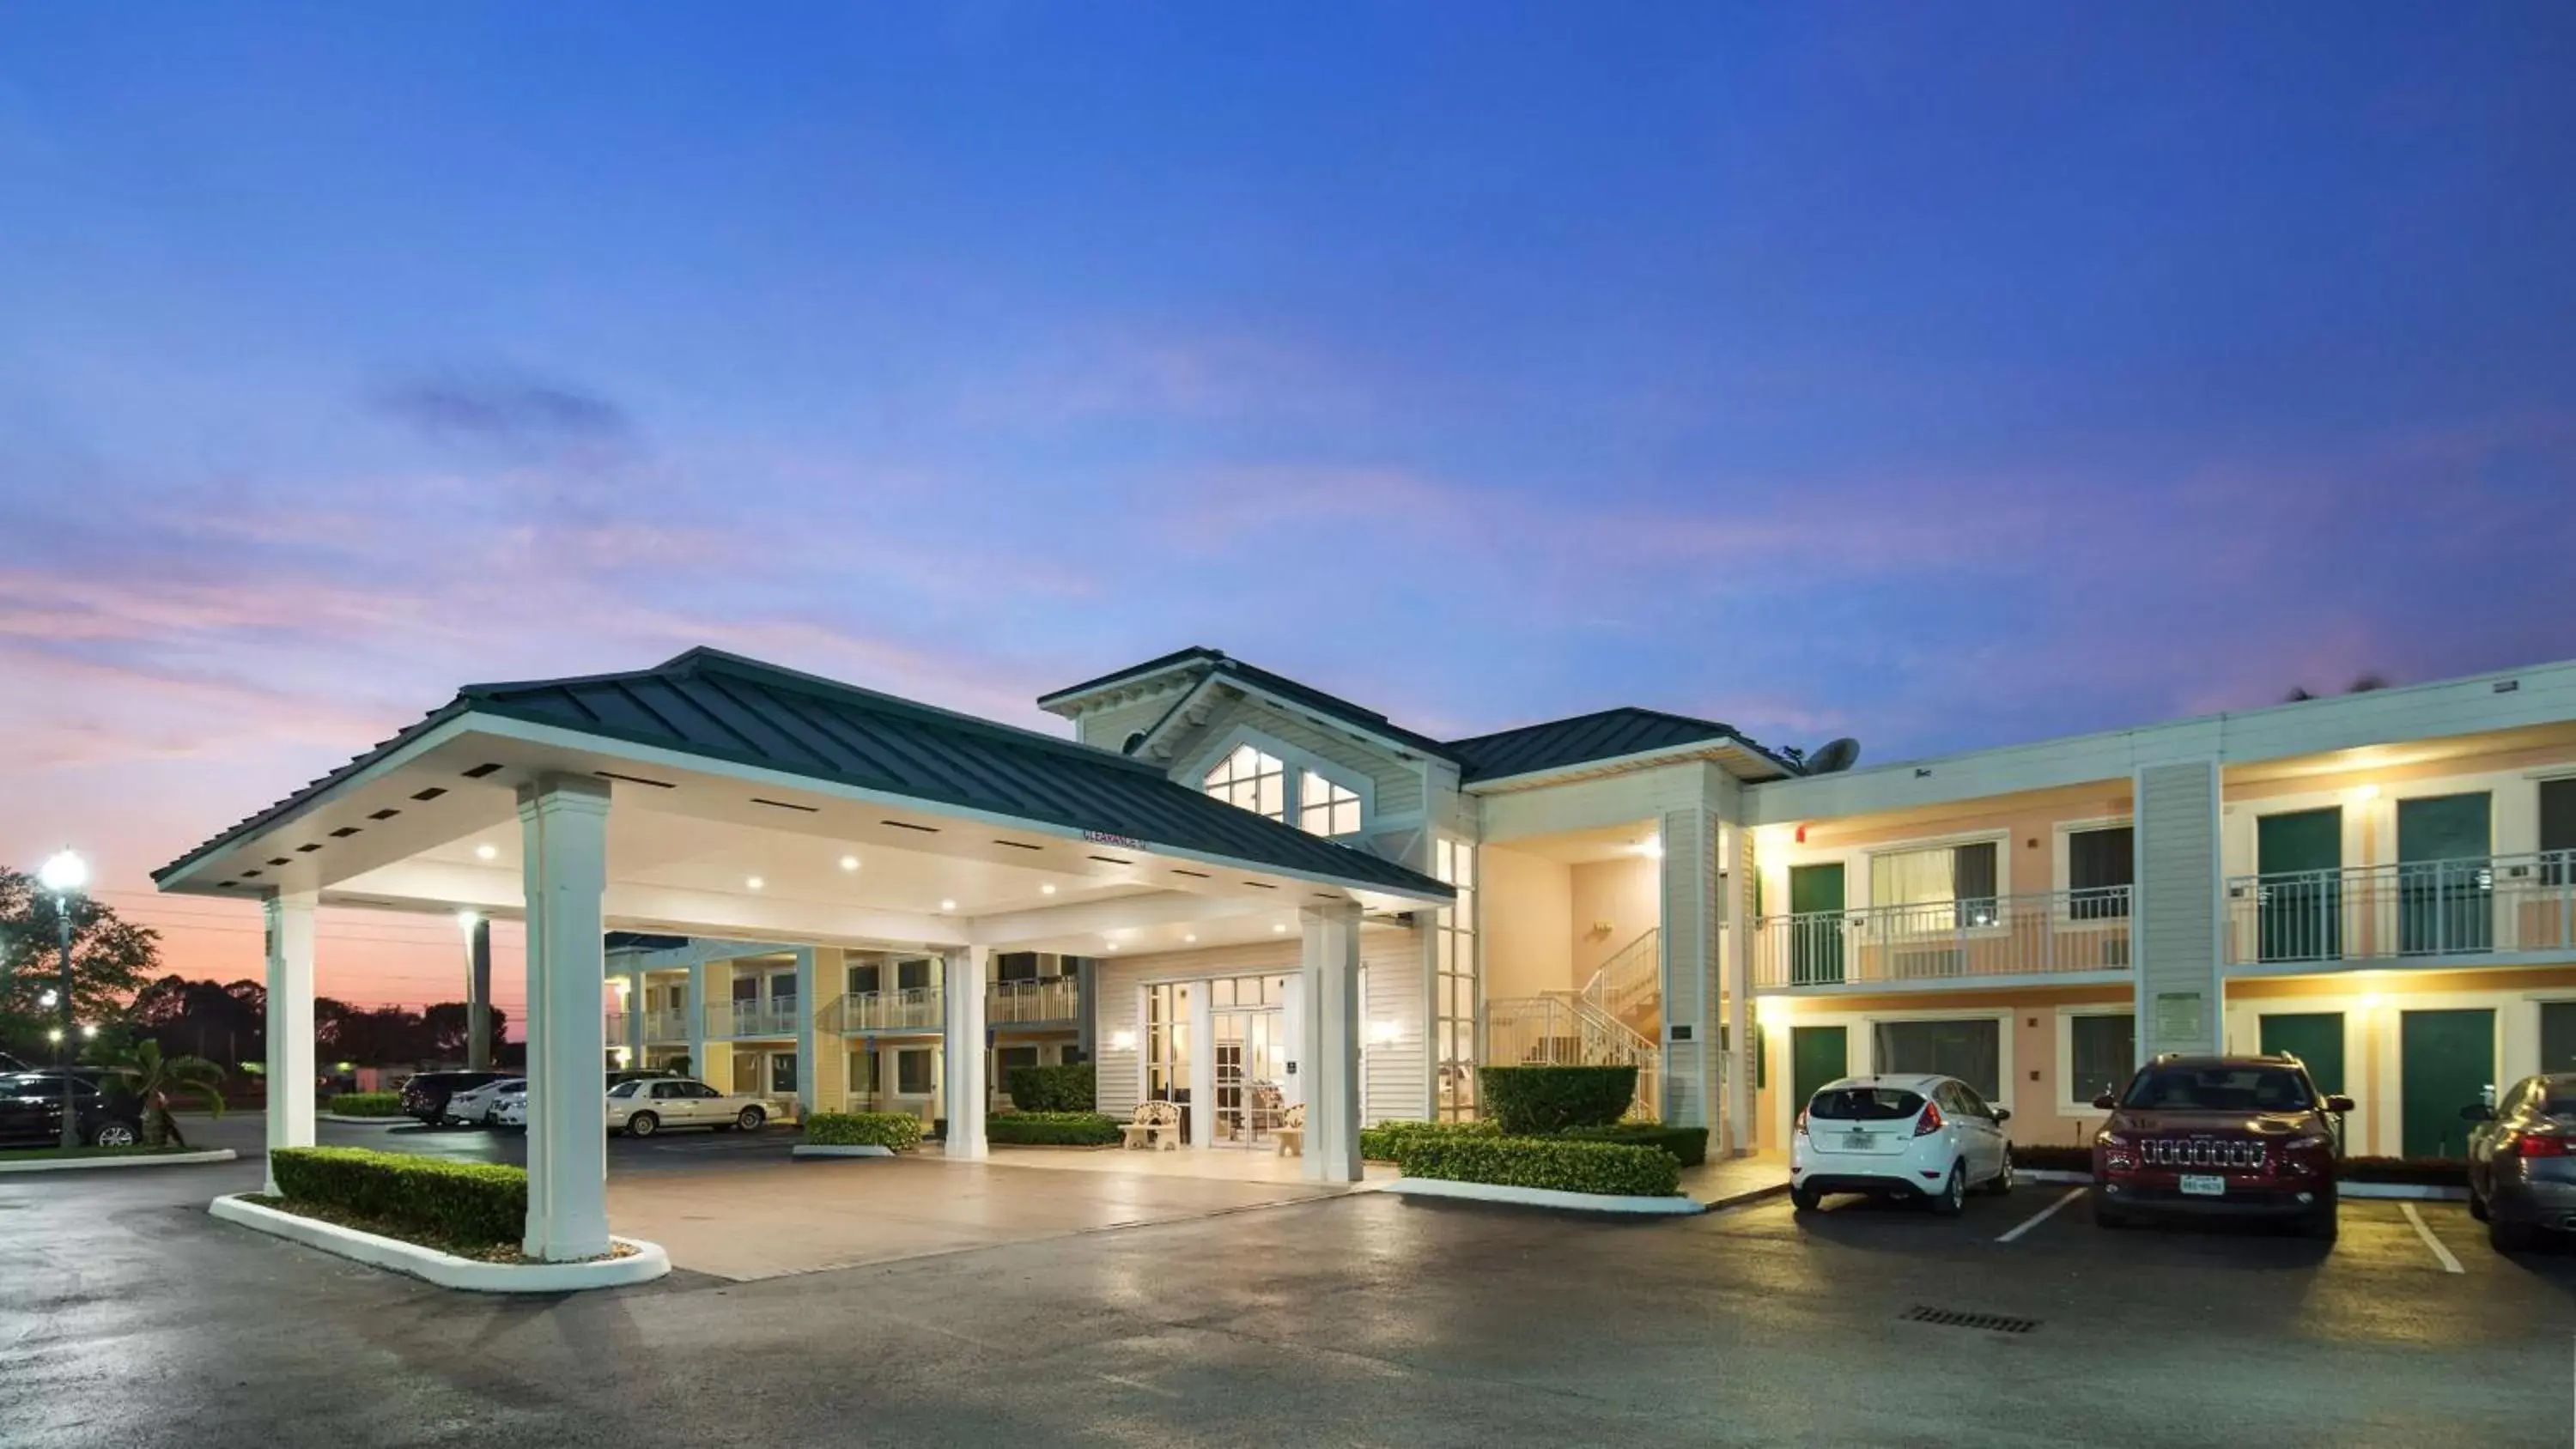 Property building in Best Western Gateway To The Keys - Florida City, Homestead, Everglades